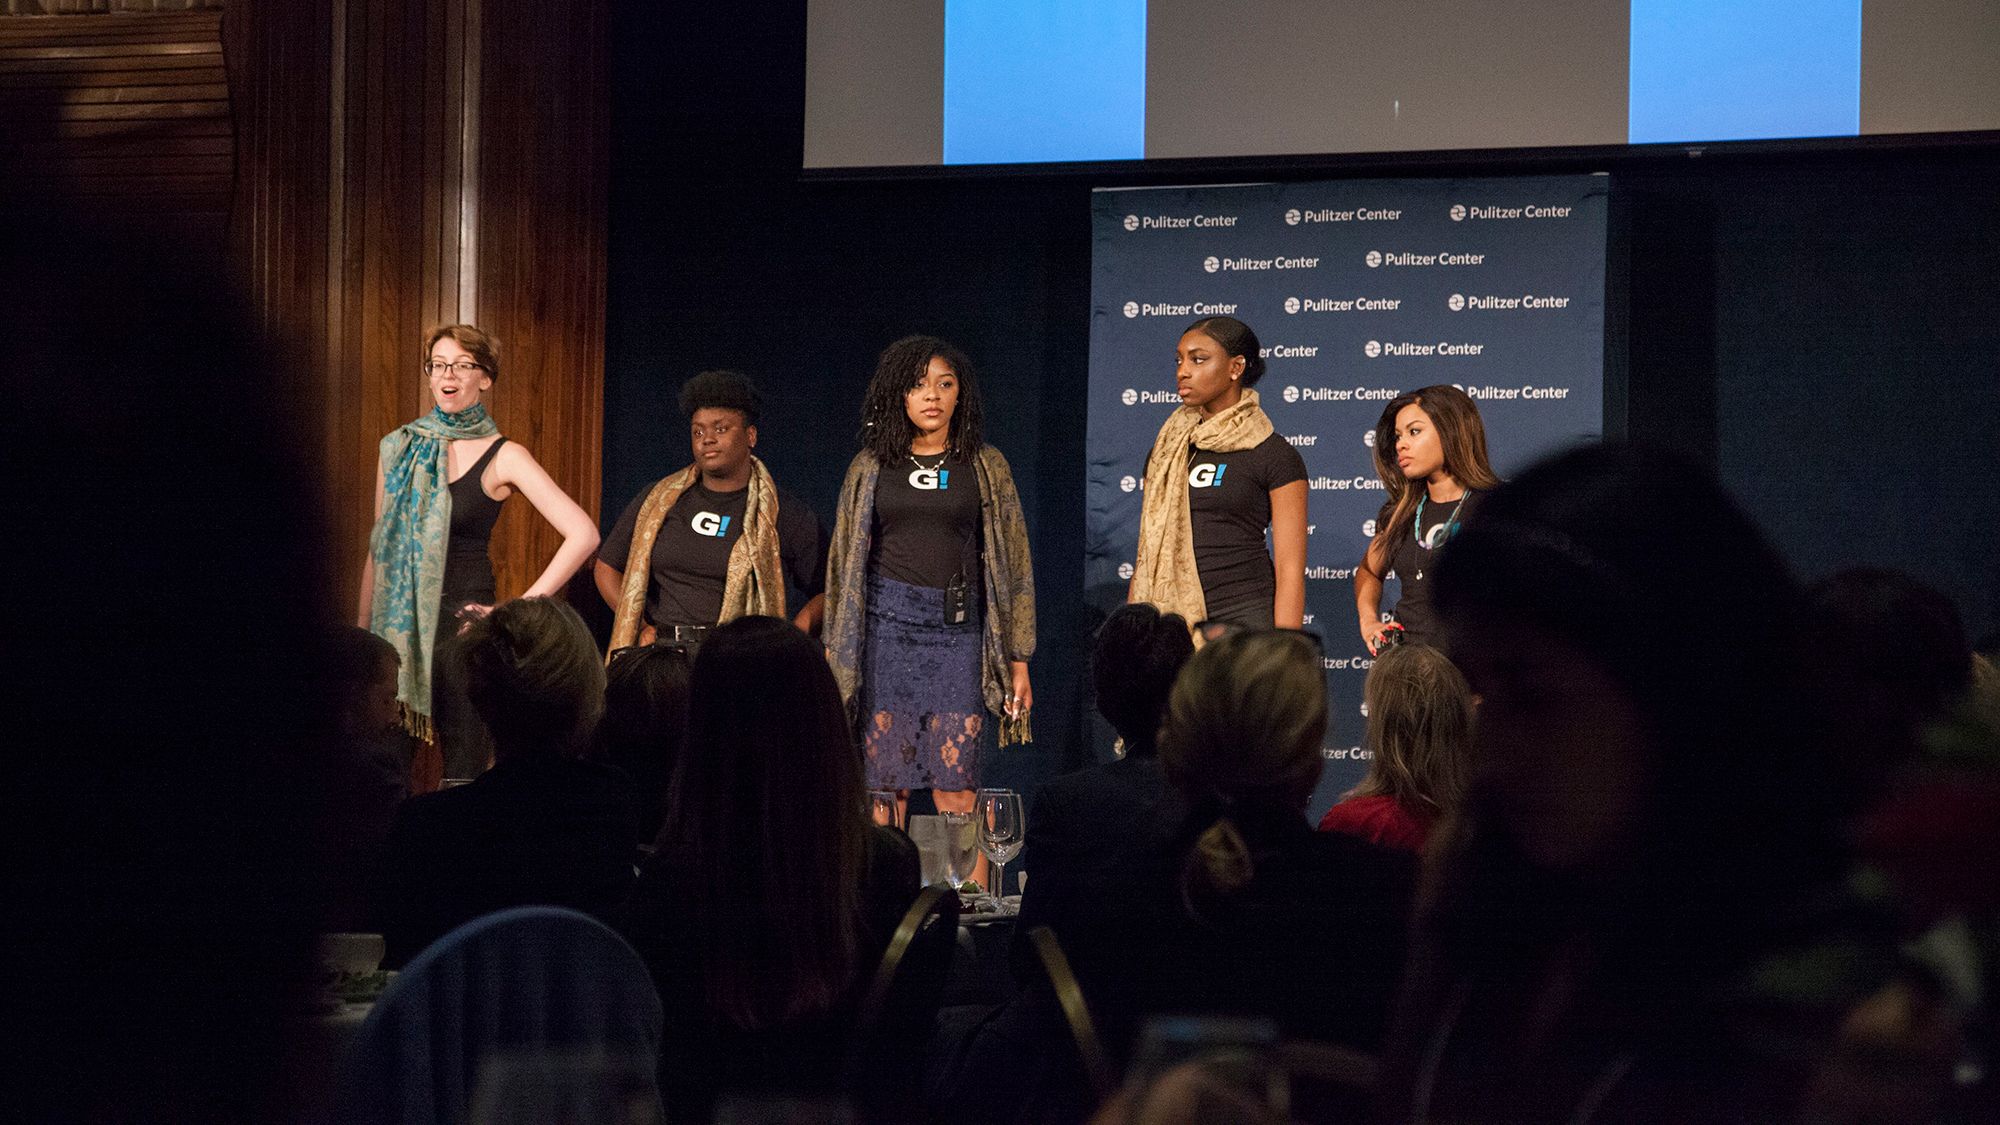 Girl Be Heard performing at the Gender Lens conference. Image by Jin Ding. United States, 2017.